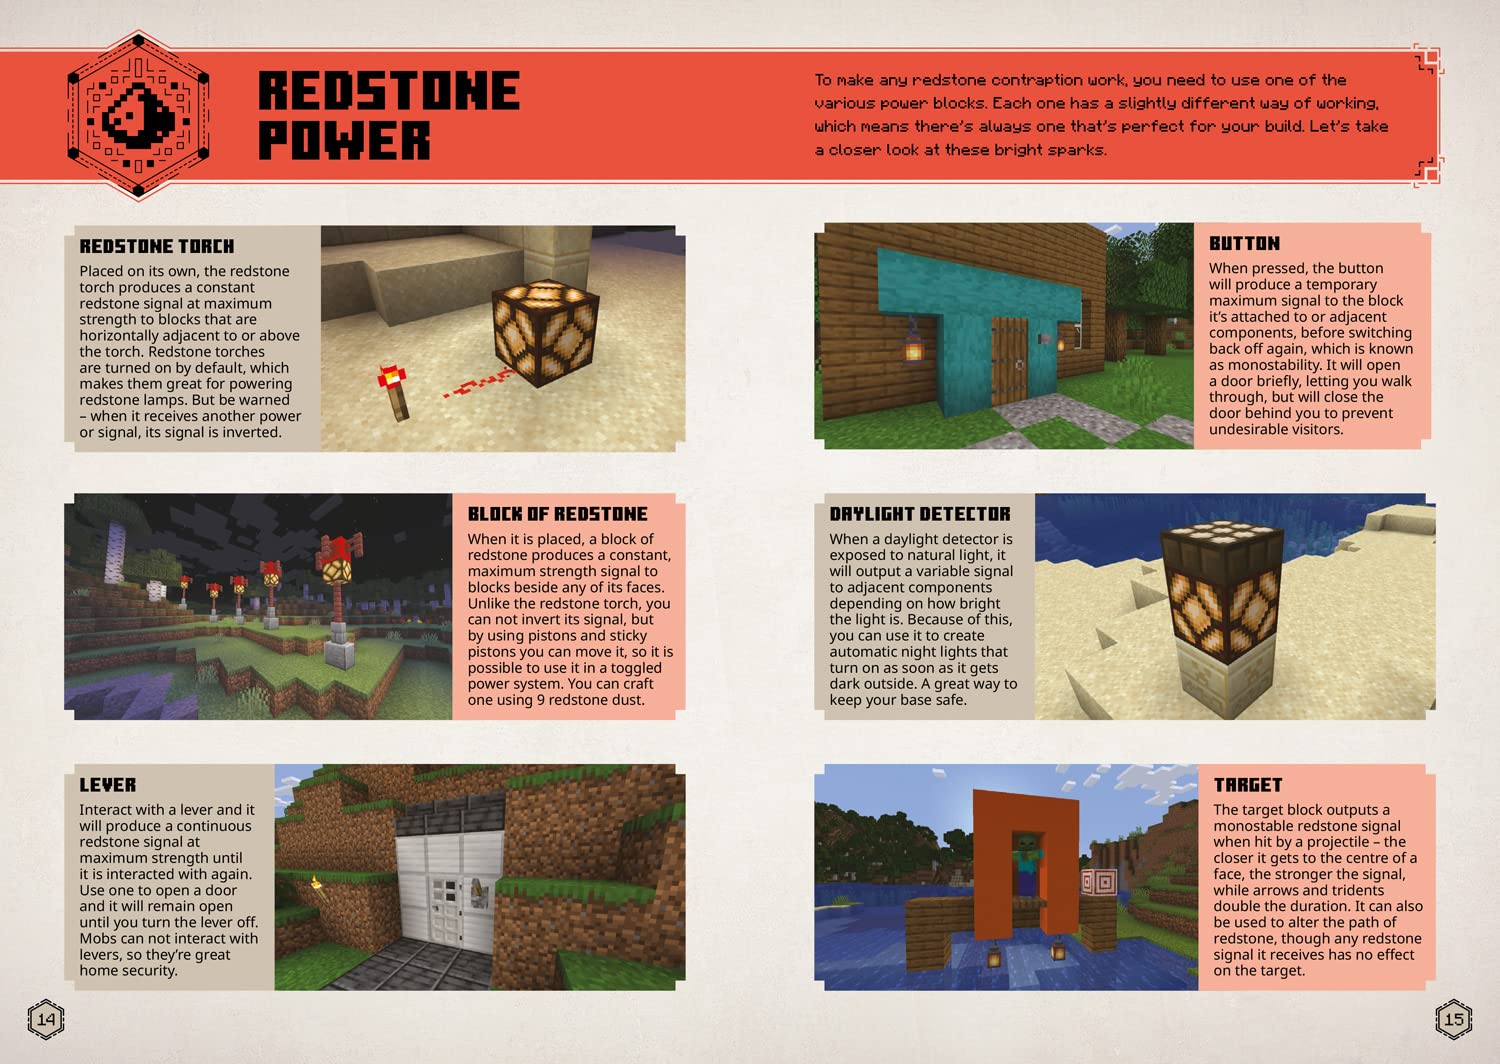 Minecraft Redstone and Essential Handbook Pair Two Official Mojang Books  9780545685153